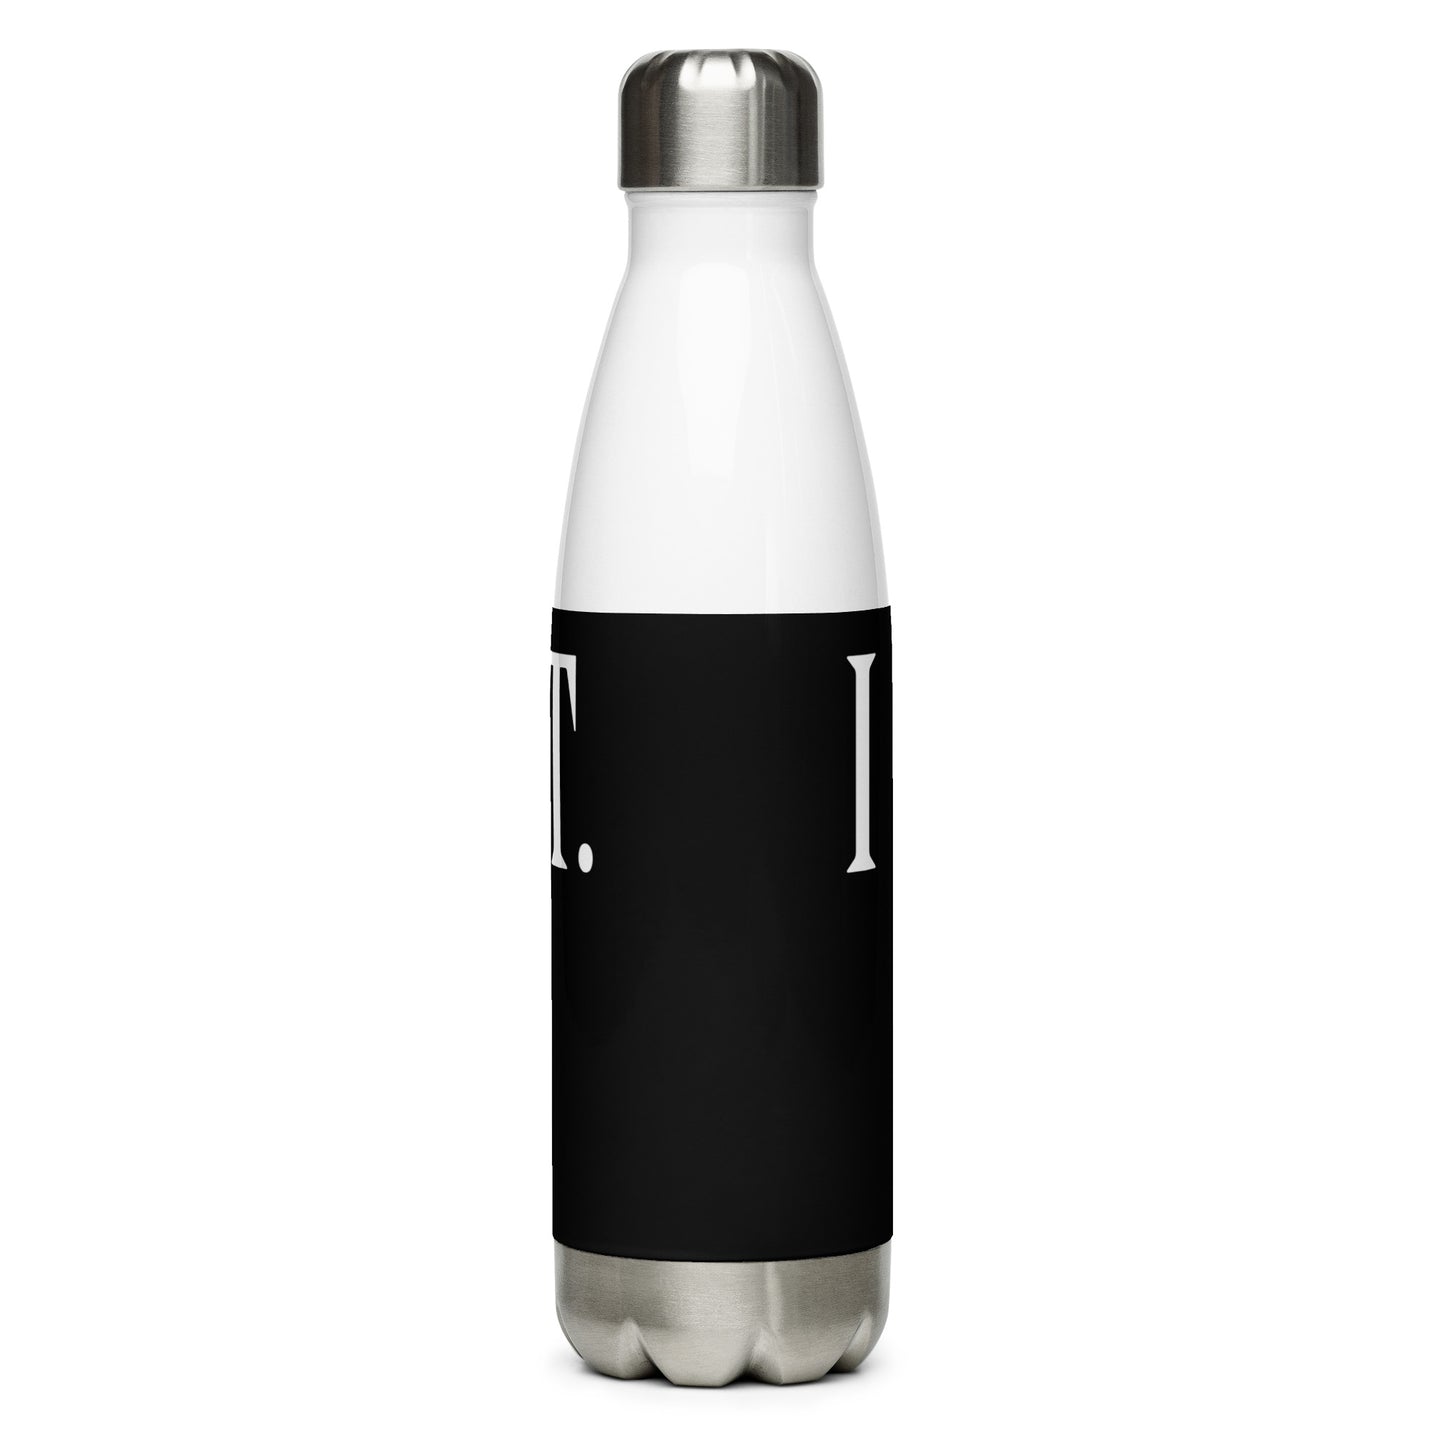 I Dissent Stainless Steel Water Bottle